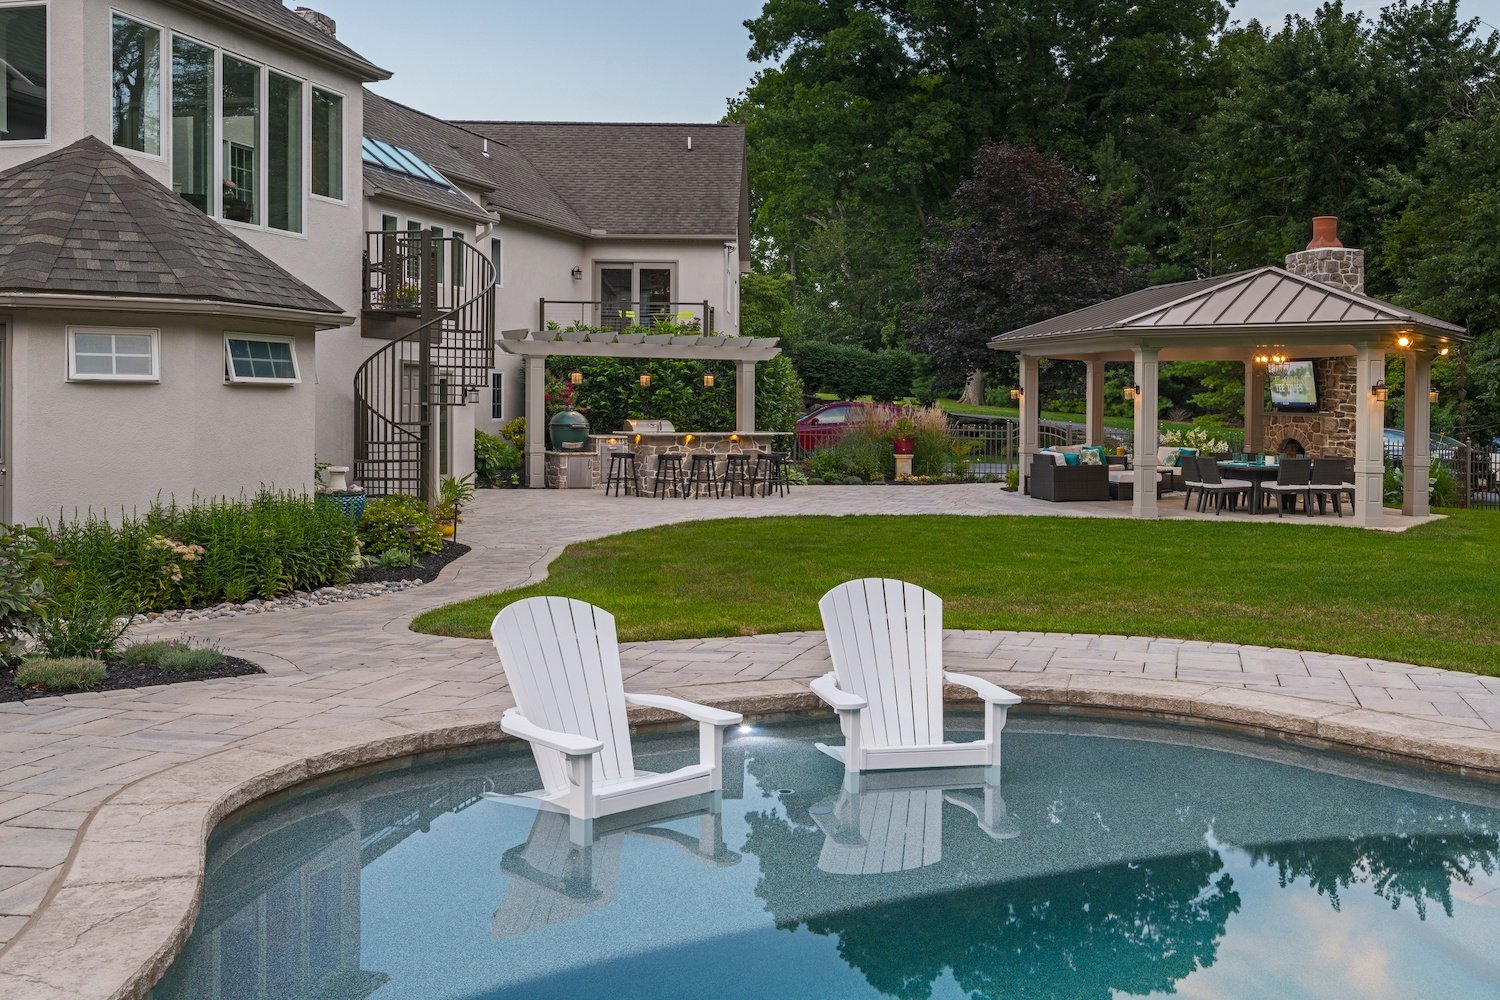 Strasburg, PA Landscaping Case Study: Creating the Ultimate Backyard Party Spot